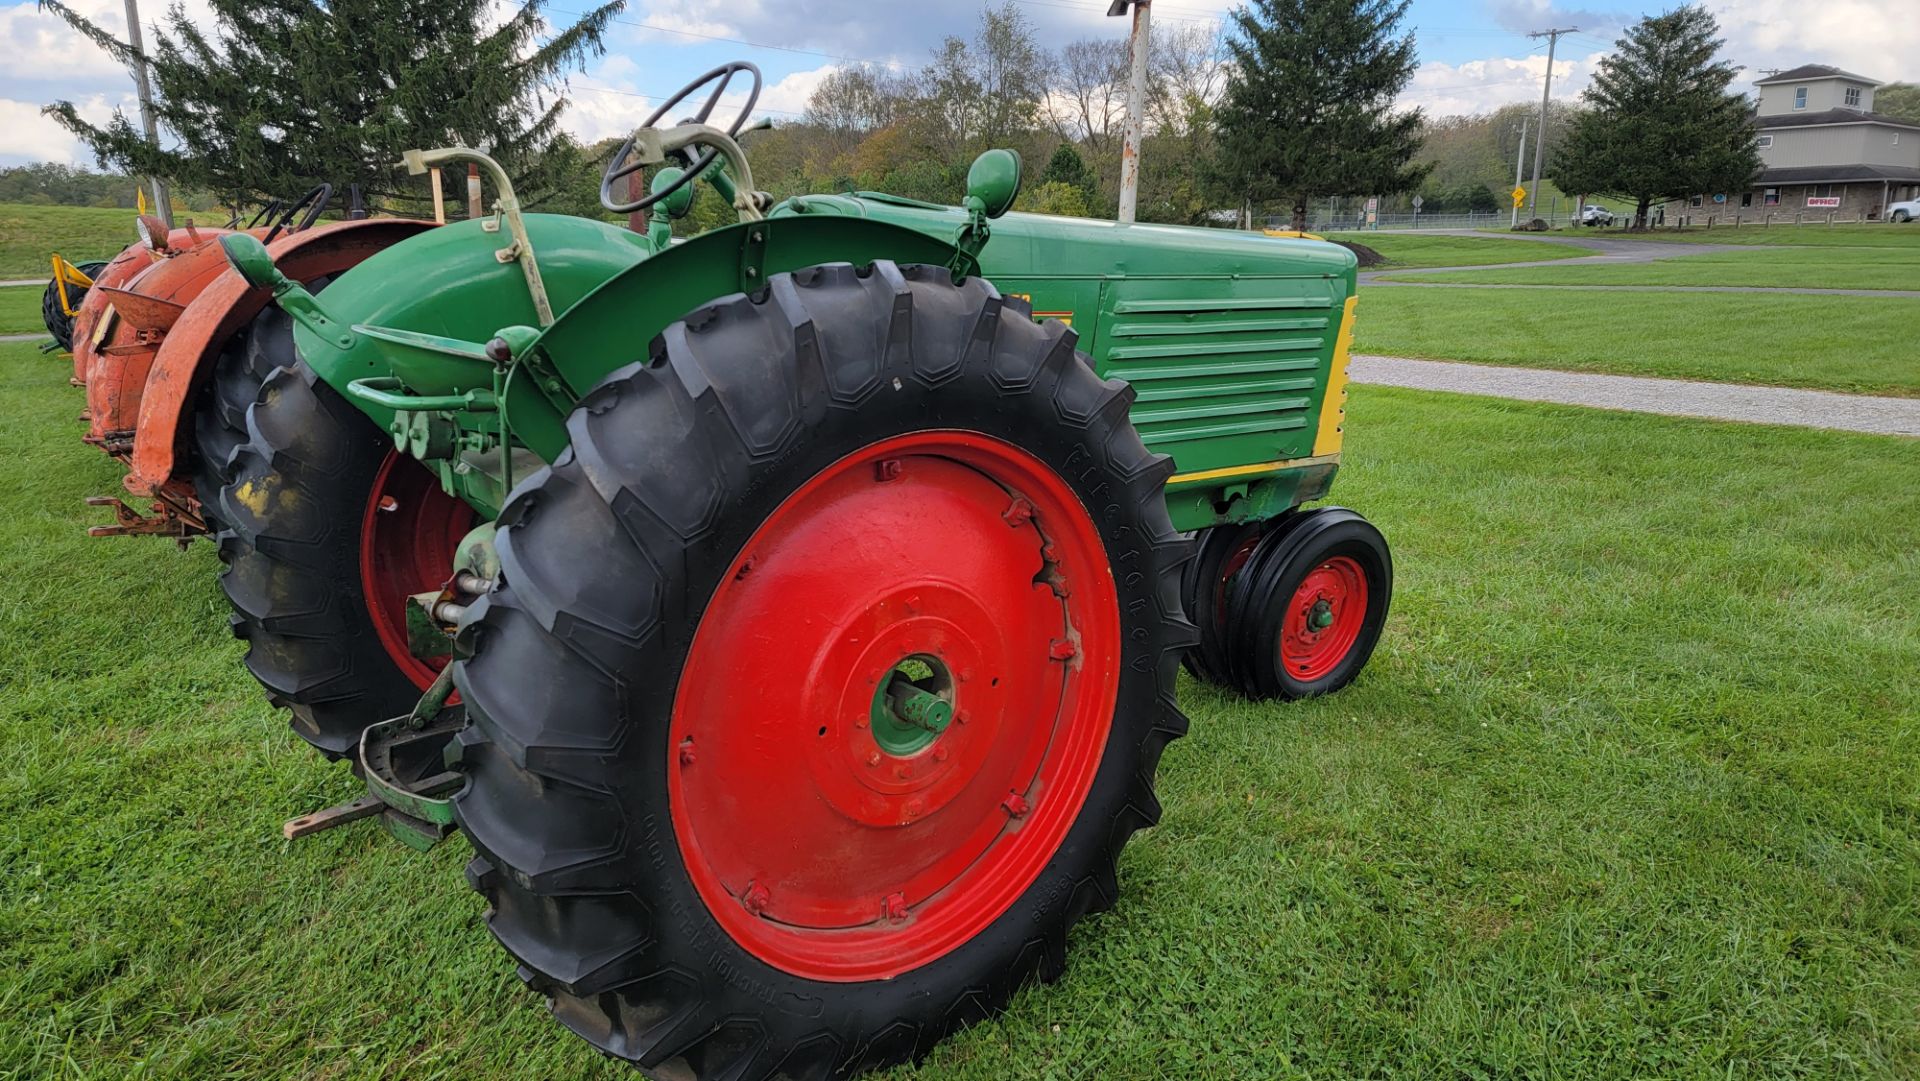 1951 Oliver 77 Row Crop Tractor, 6 Cylinder Gasoline Engine, Rear Hydraulics, Restored - Image 10 of 12